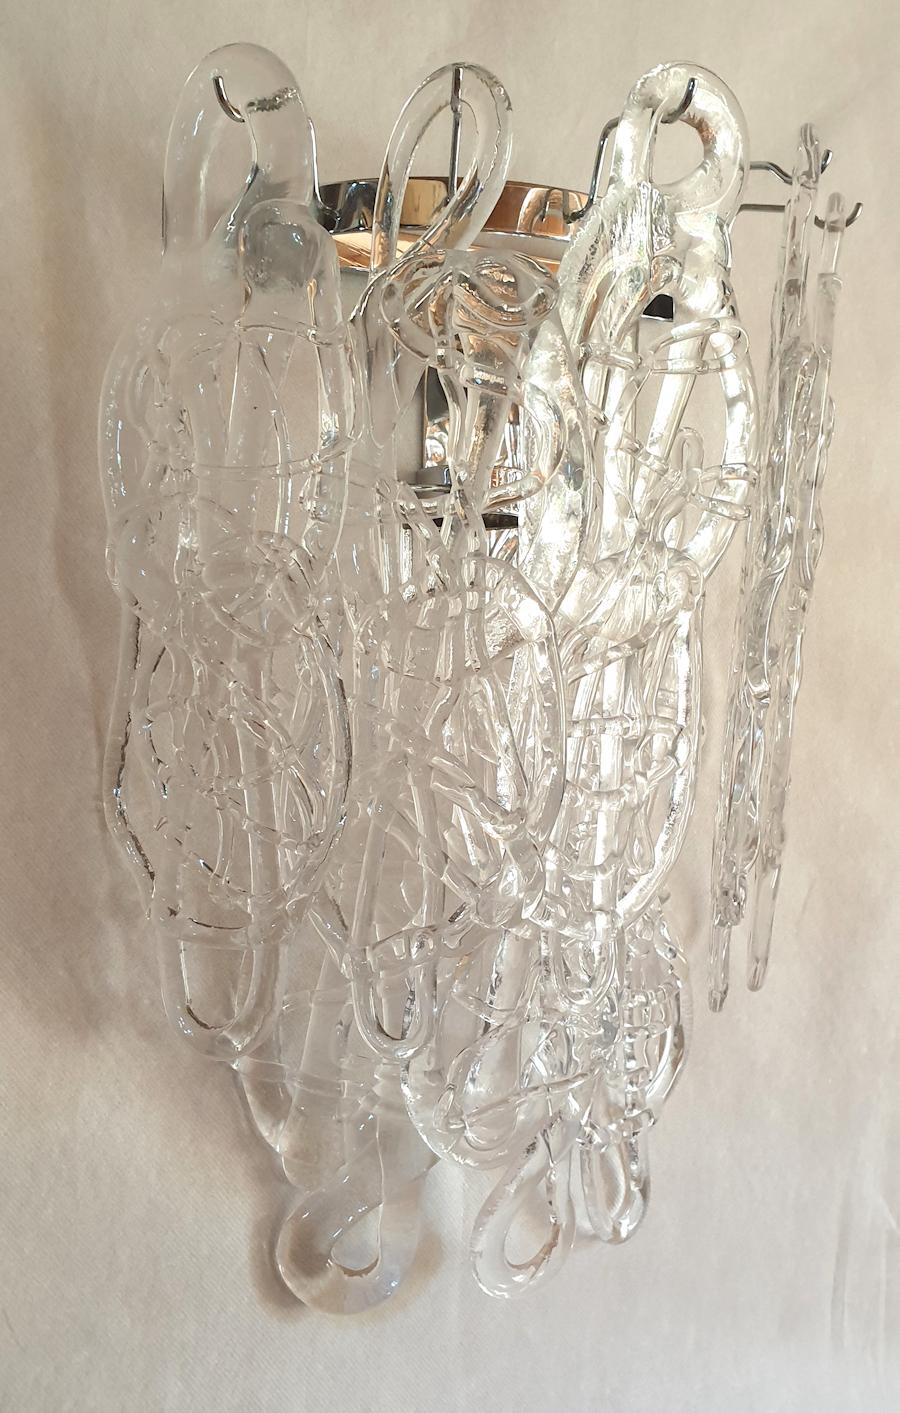 Late 20th Century Mid Century Modern Murano Glass Sconces, by Mazzega - a pair